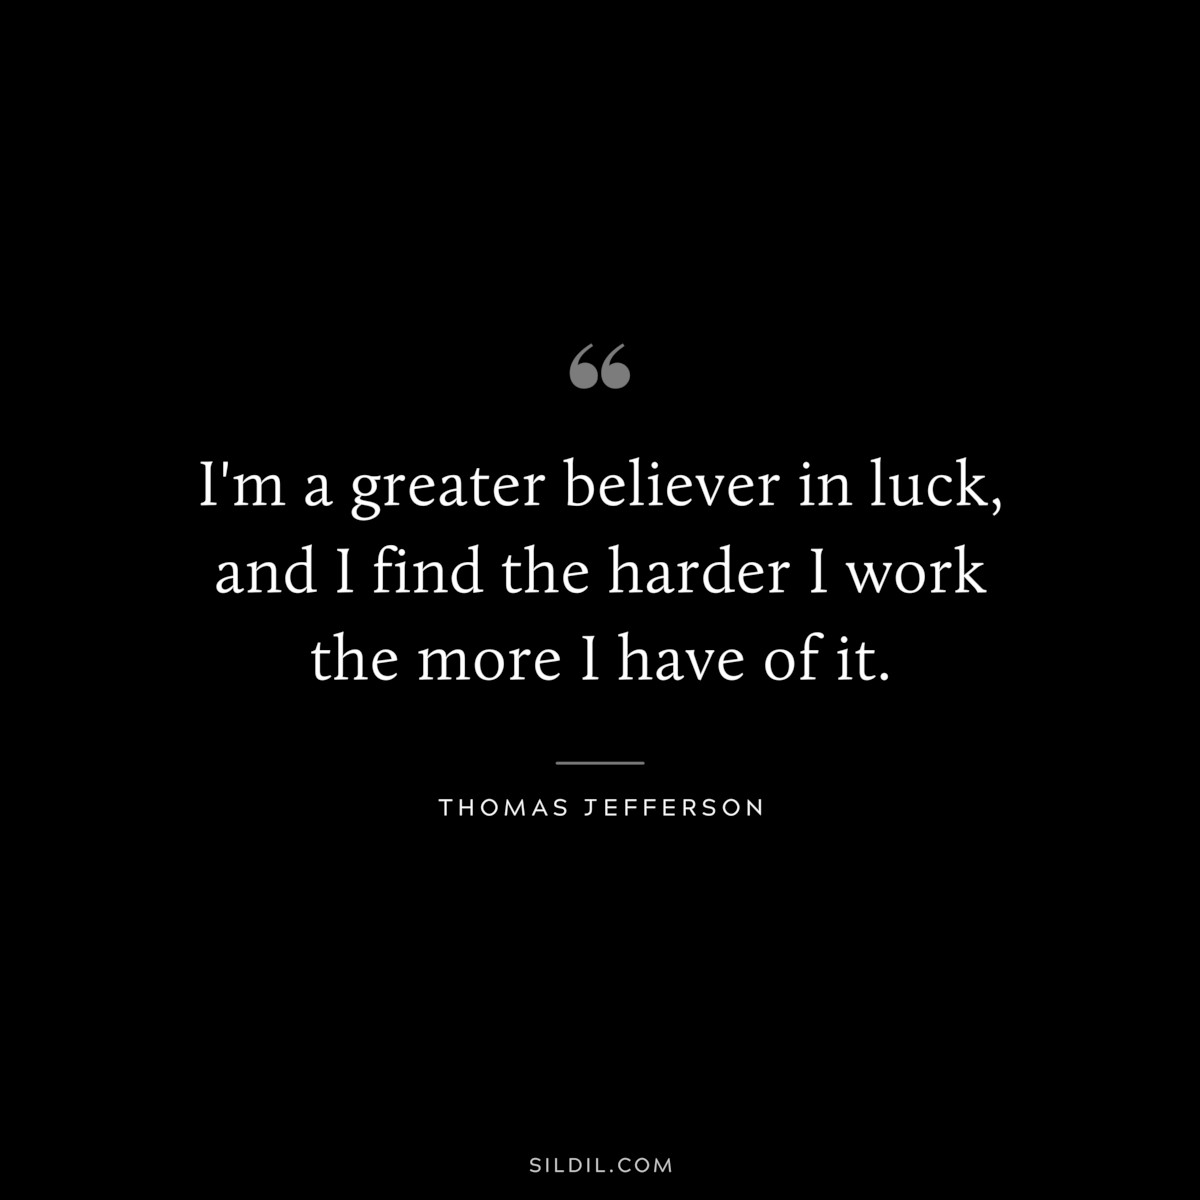 I'm a greater believer in luck, and I find the harder I work the more I have of it. ― Thomas Jefferson